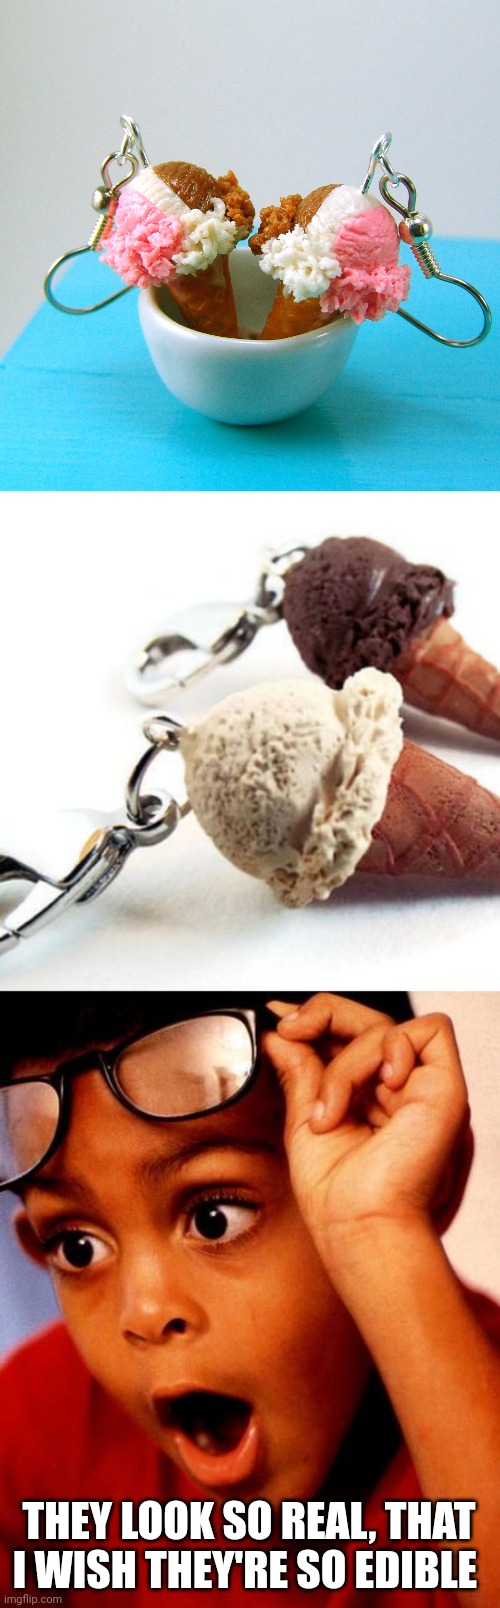 Ice cream cone keychains | THEY LOOK SO REAL, THAT I WISH THEY'RE SO EDIBLE | image tagged in wow,ice cream,ice cream cone,keychains,keychain,memes | made w/ Imgflip meme maker